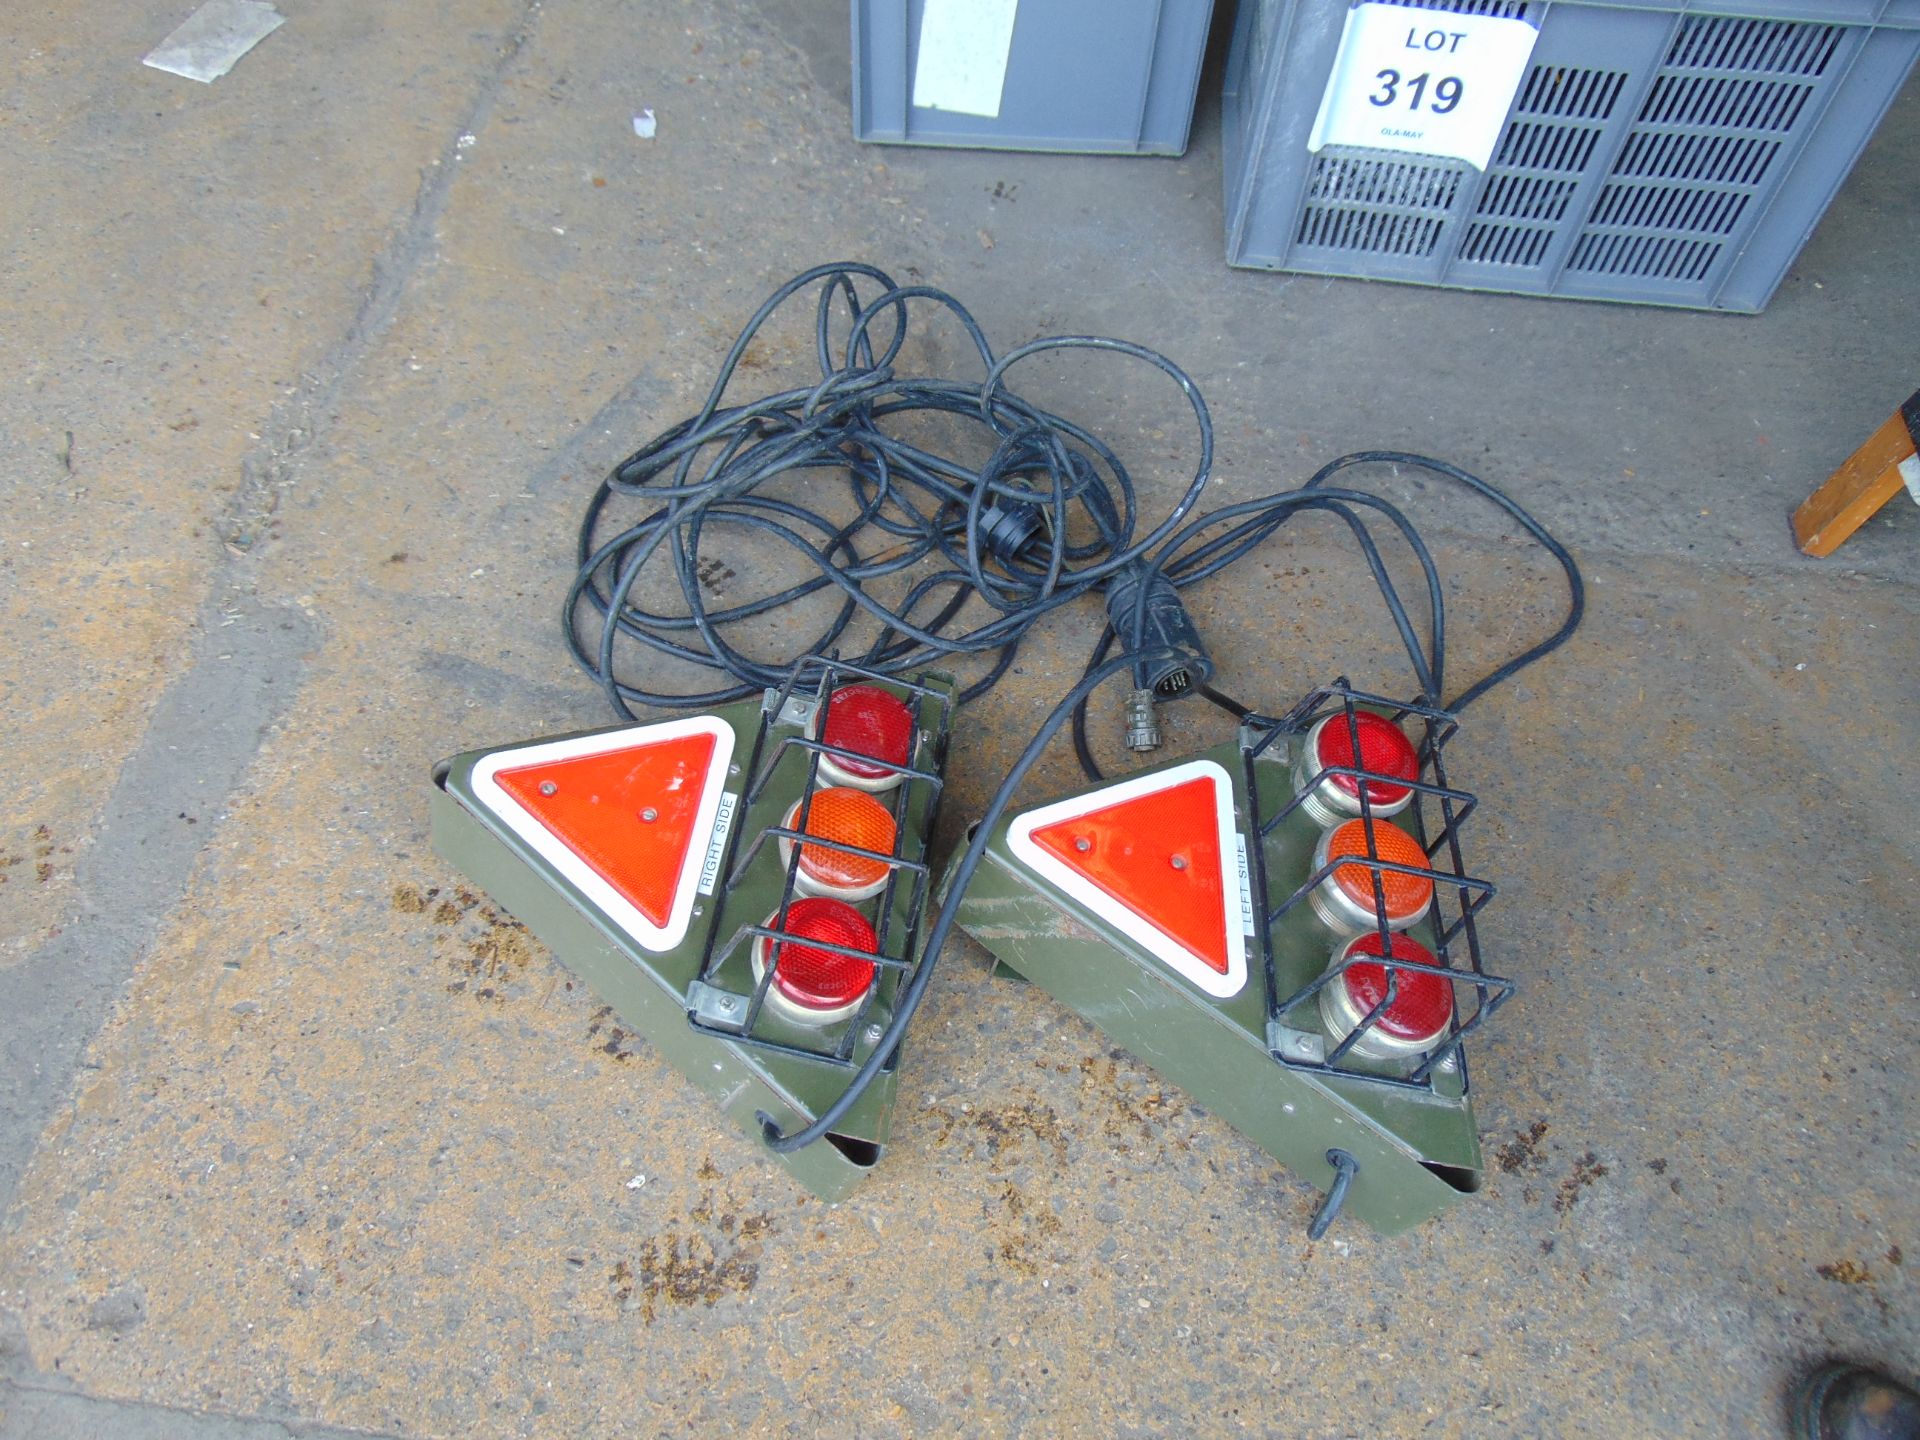 2 x Nrw Unissued Trailer Marker Light Kit c/w Cables and Nato Plugs - Image 2 of 5